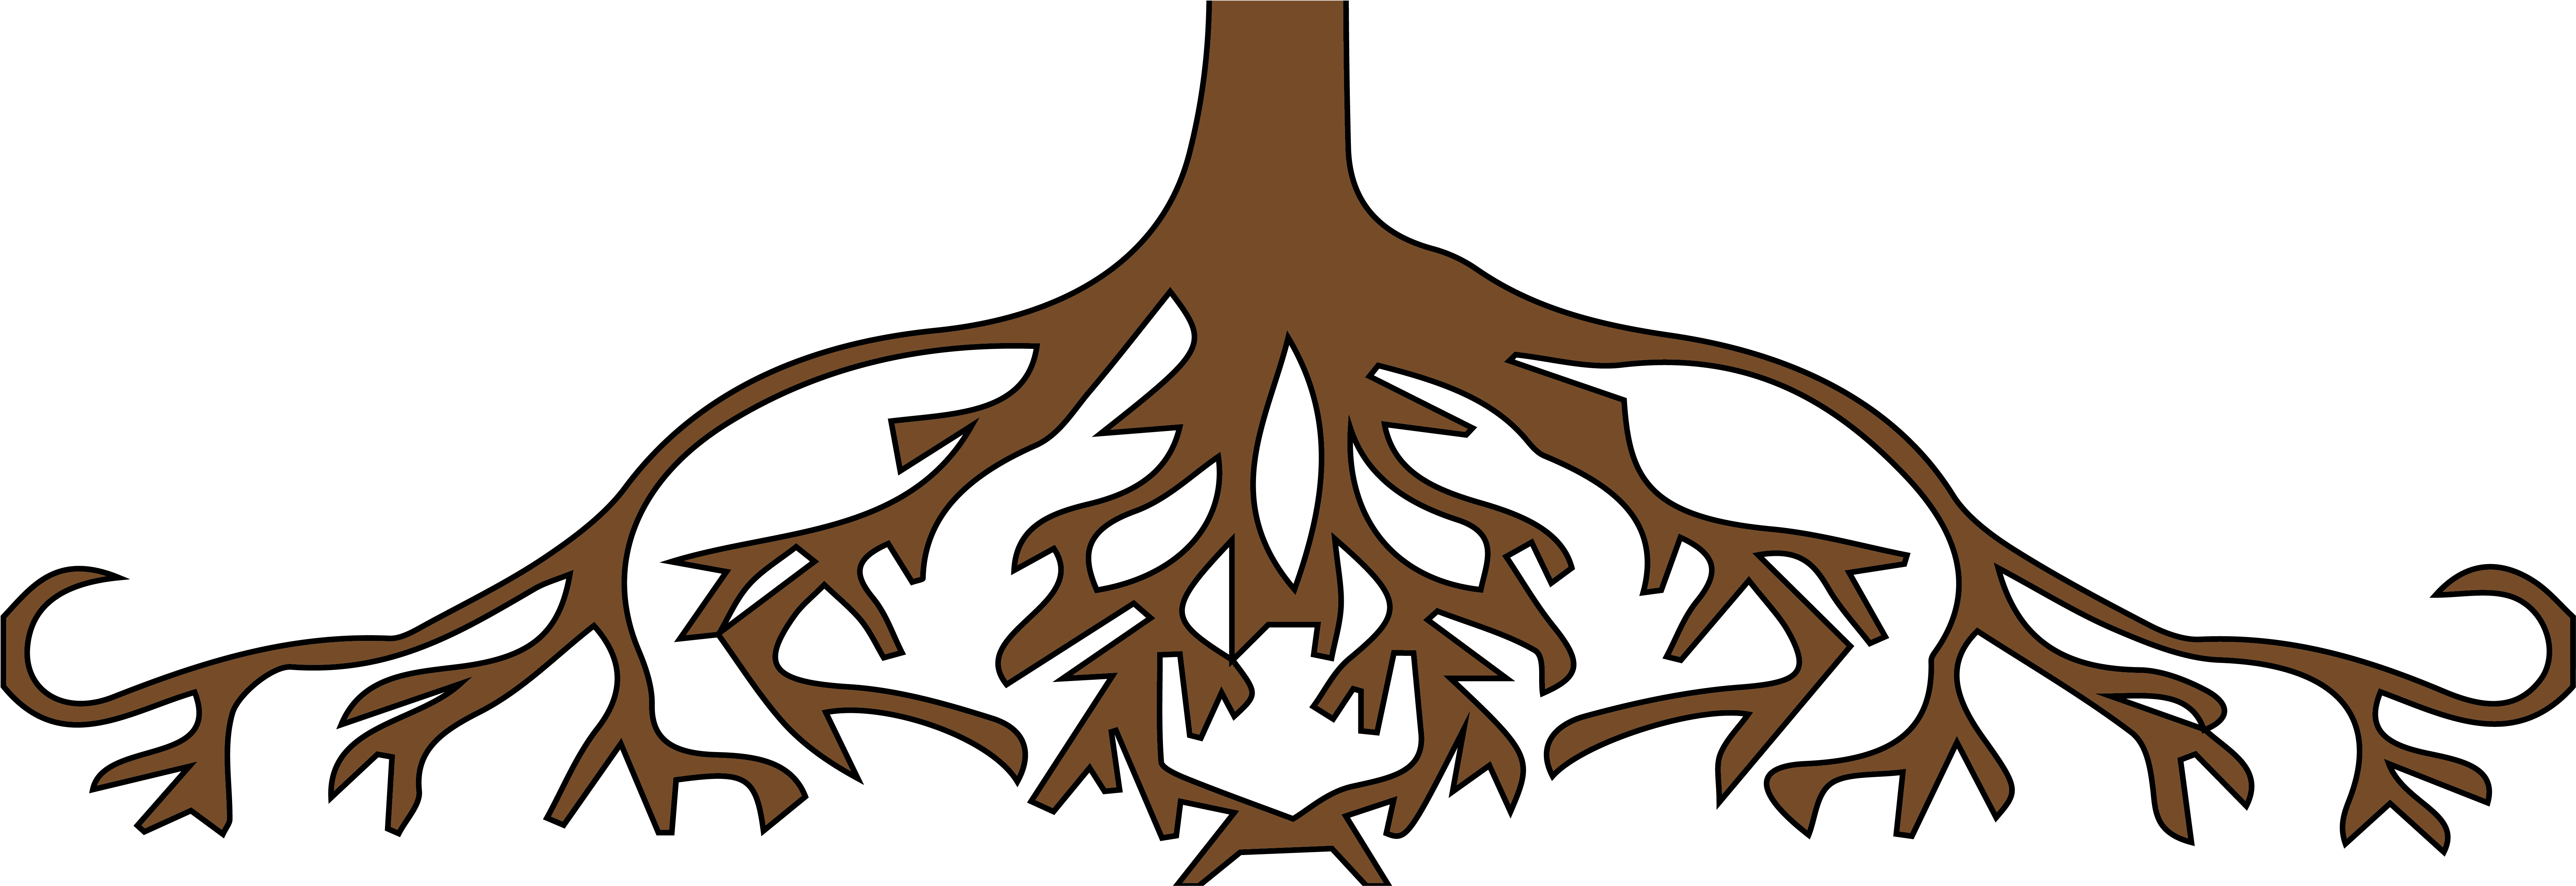 Root PNG Background